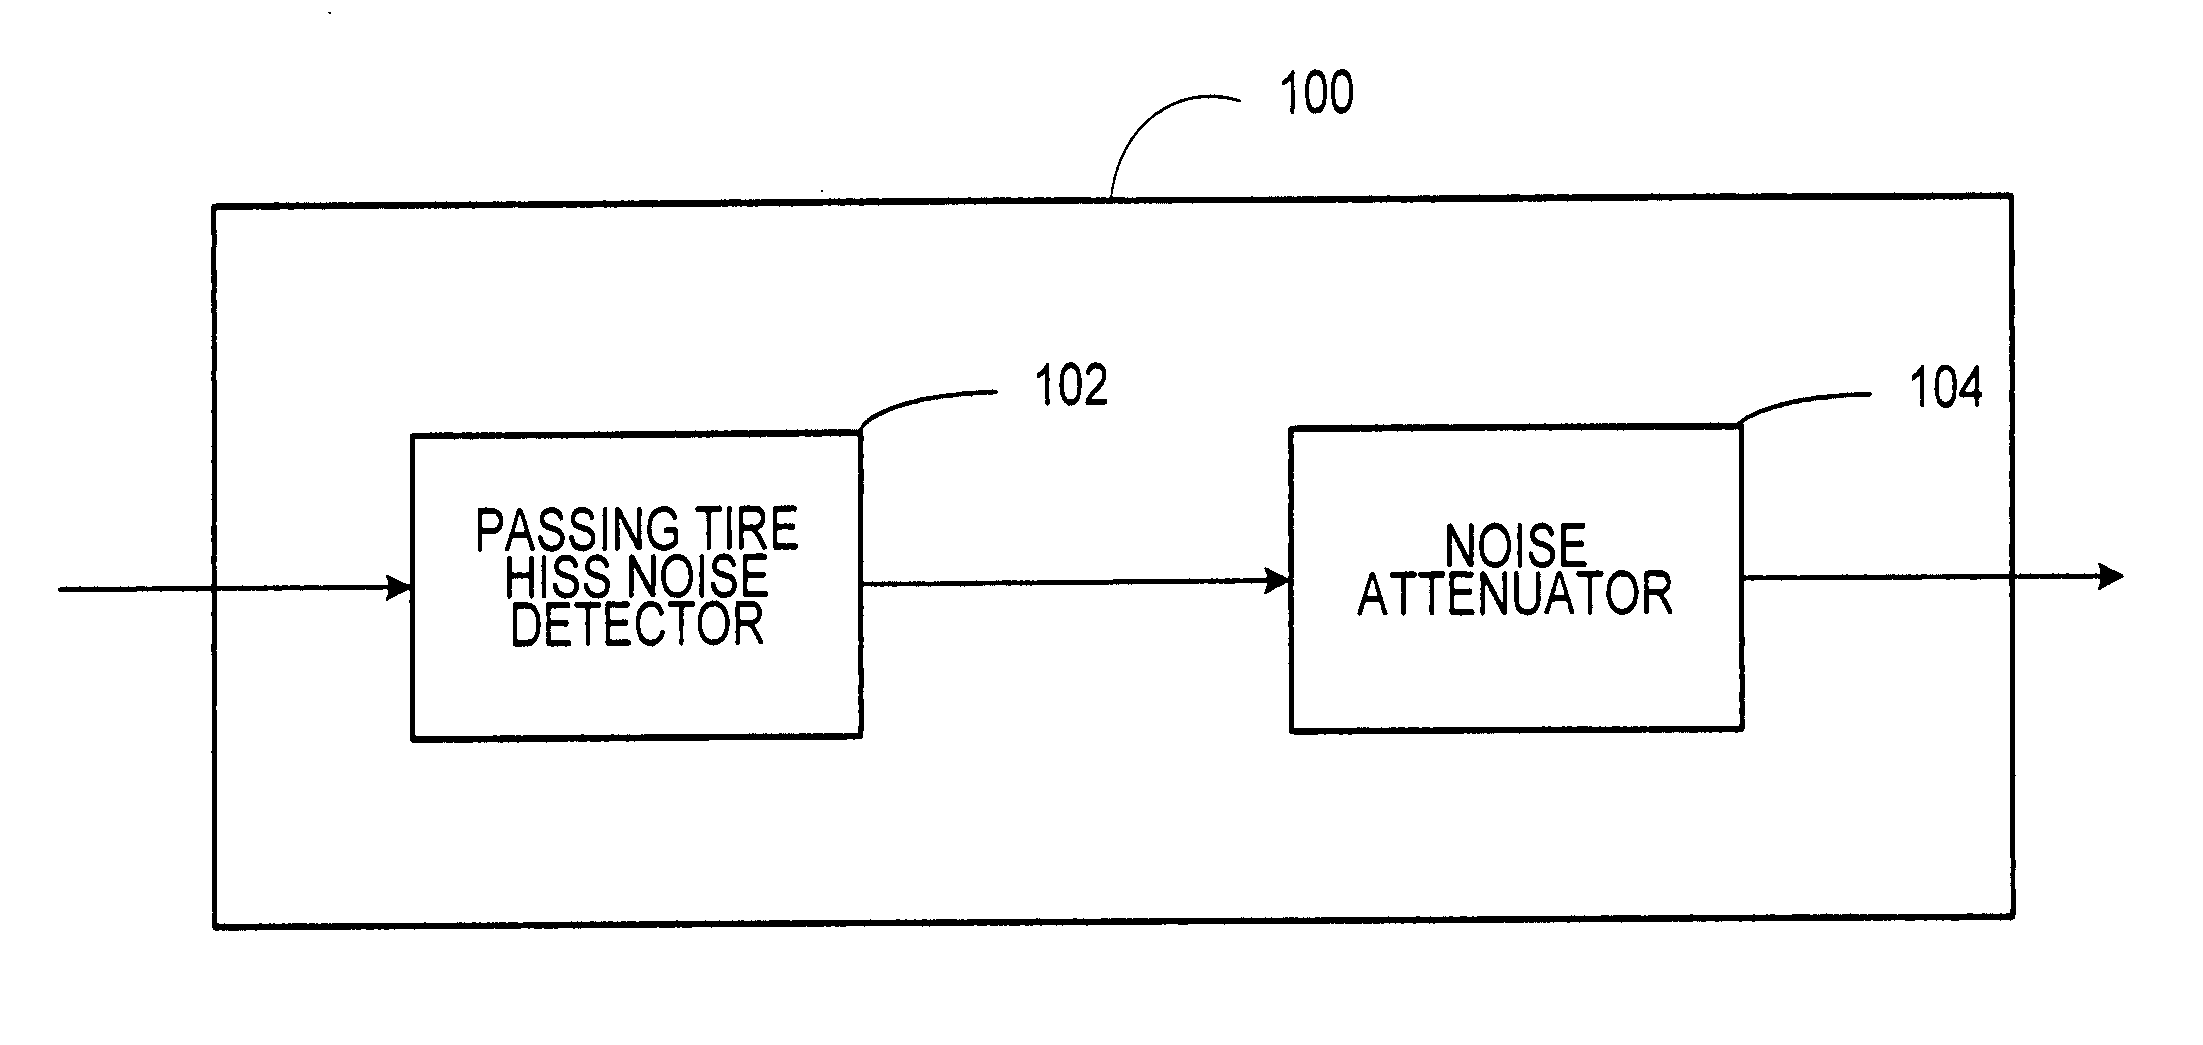 System for suppressing passing tire hiss